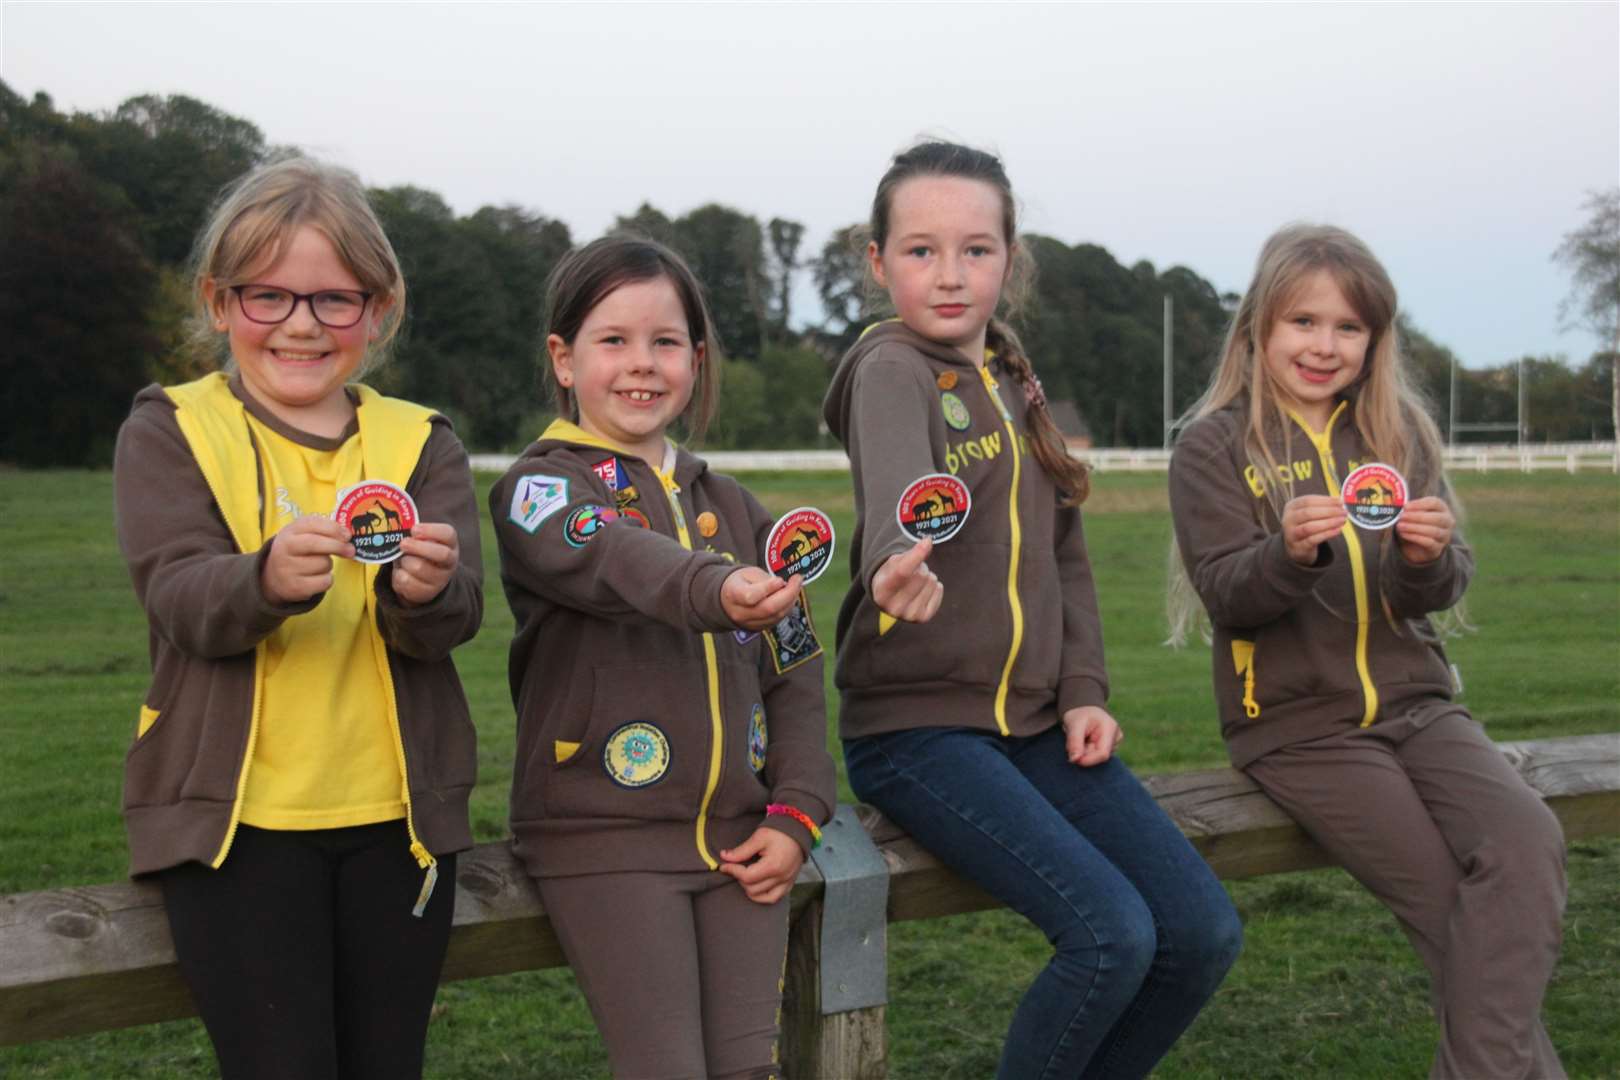 Turriff Brownies are excited to help other people.